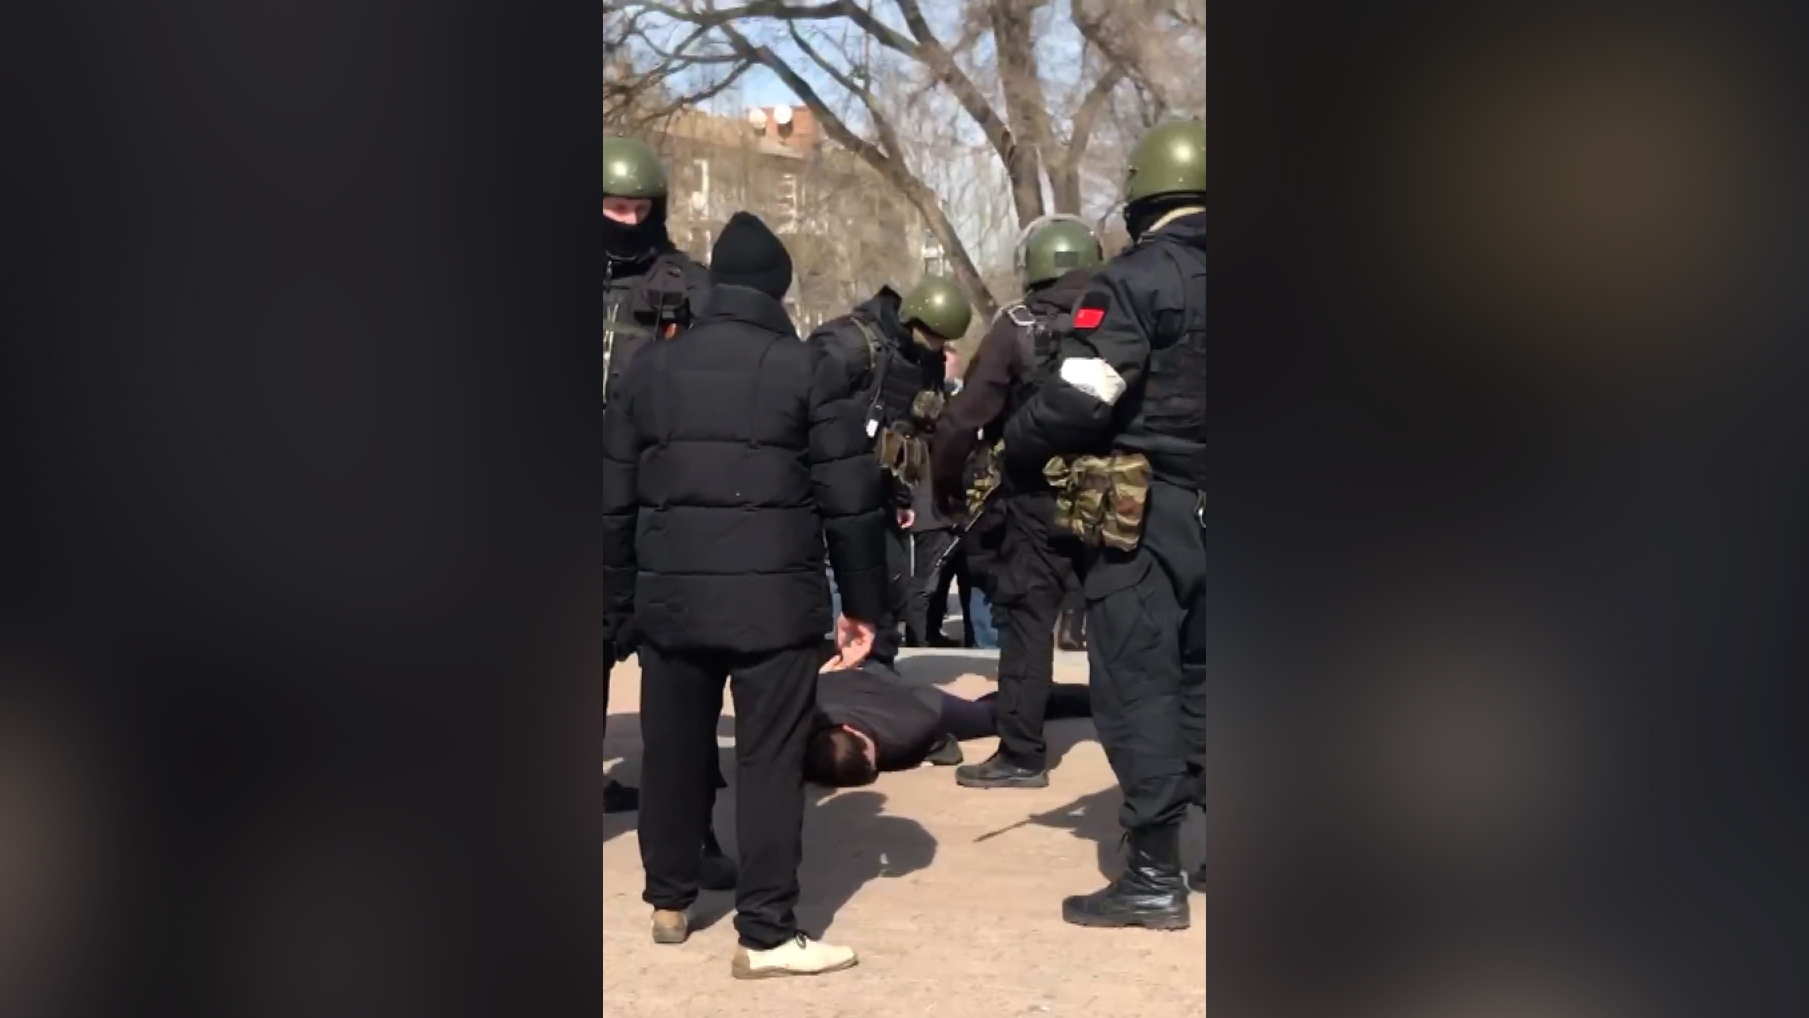 Russian military troops appeared to detain at least two Ukrainian protesters, and kick at least one in Berdyansk, Ukraine on March 20.